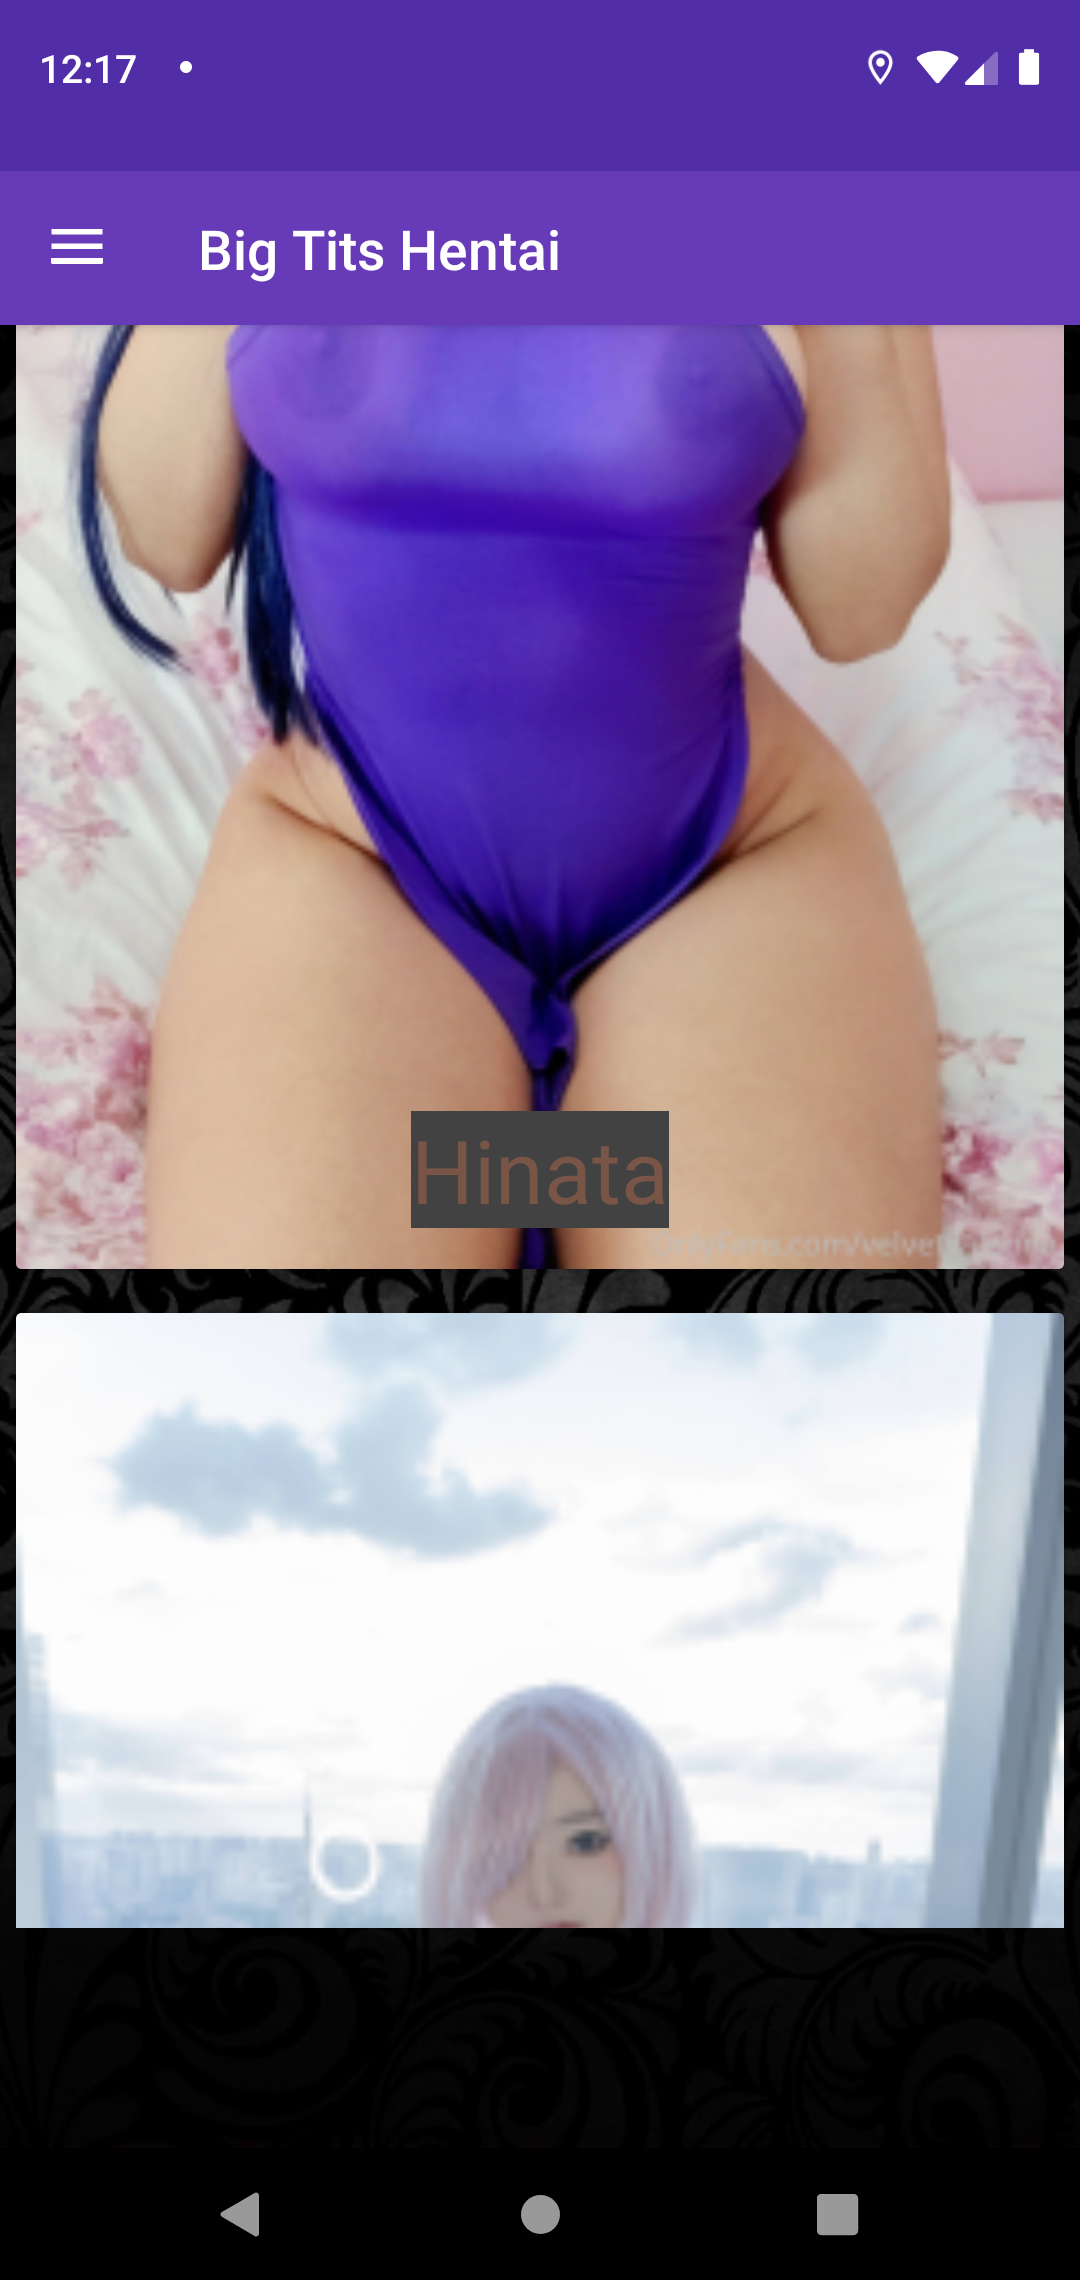 Big Tits Hentai apps,hentai,fuck,lair,best,demonic,photos,punishment,porn,futanari,photo,puzzle,tits,gallery,comics,with,girls,download,anime,hot,time,asian,apk,mythras,feast,sexy